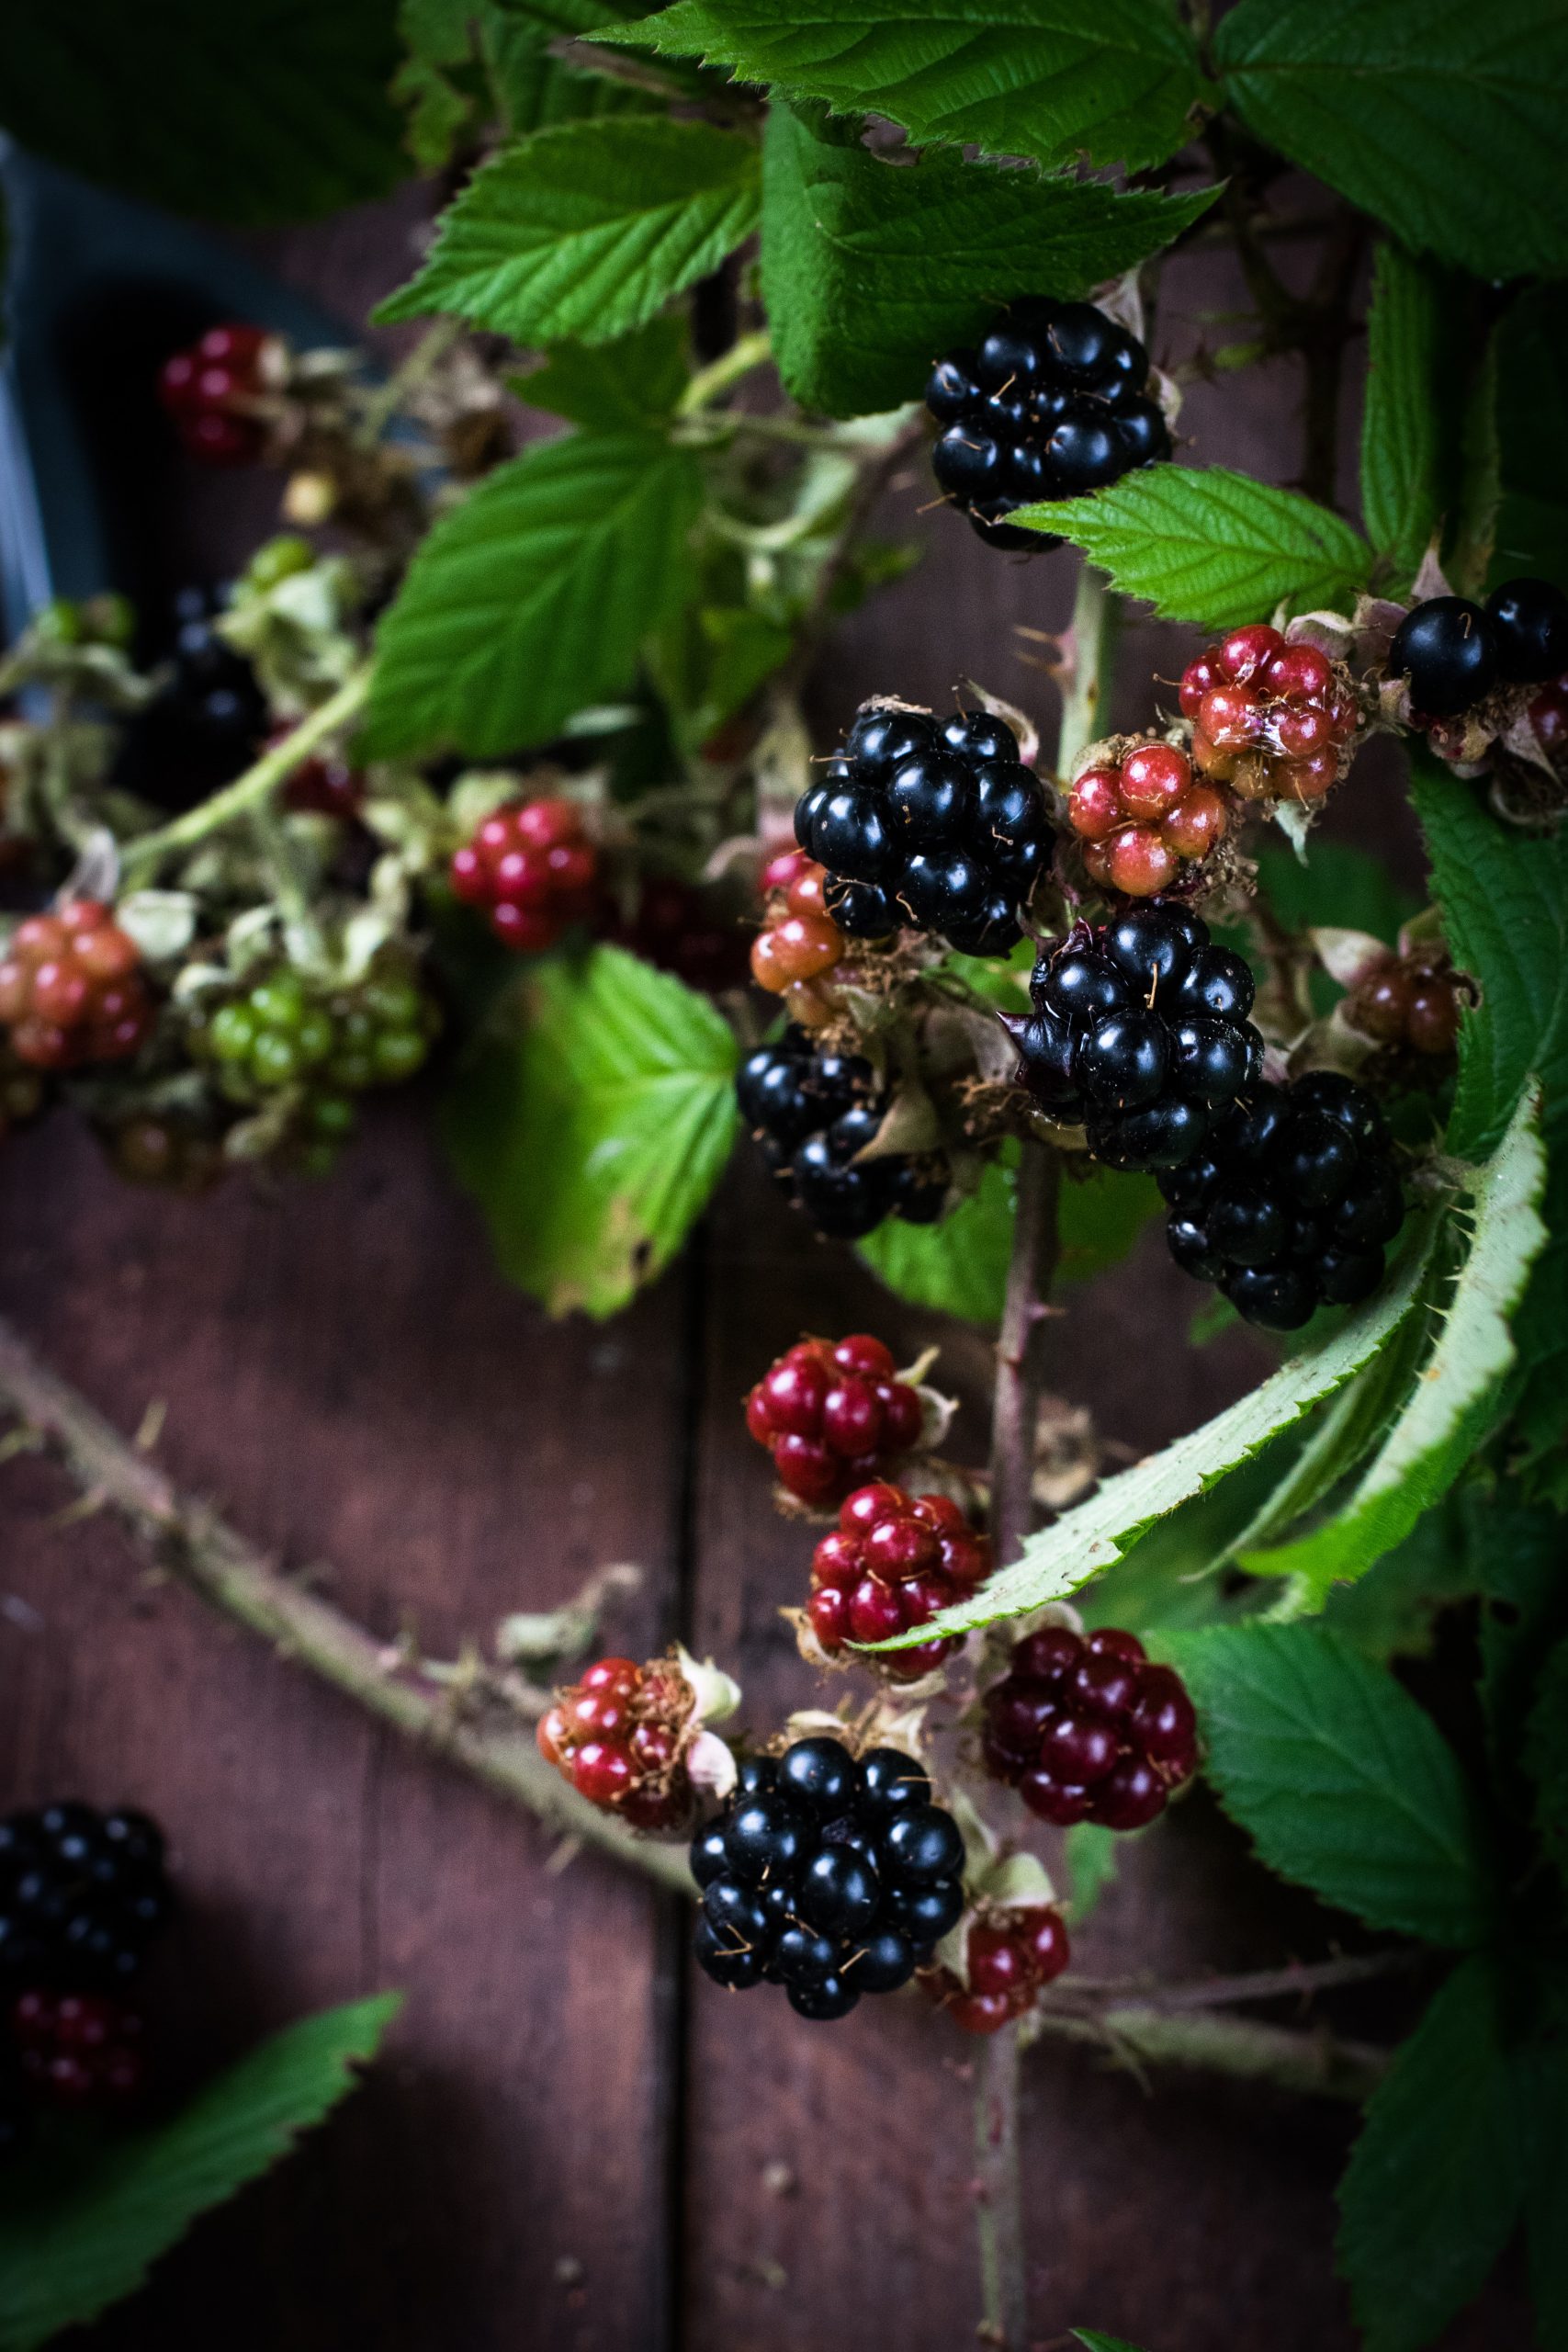 Blackberries Vs Black Currants: What’s The Difference?